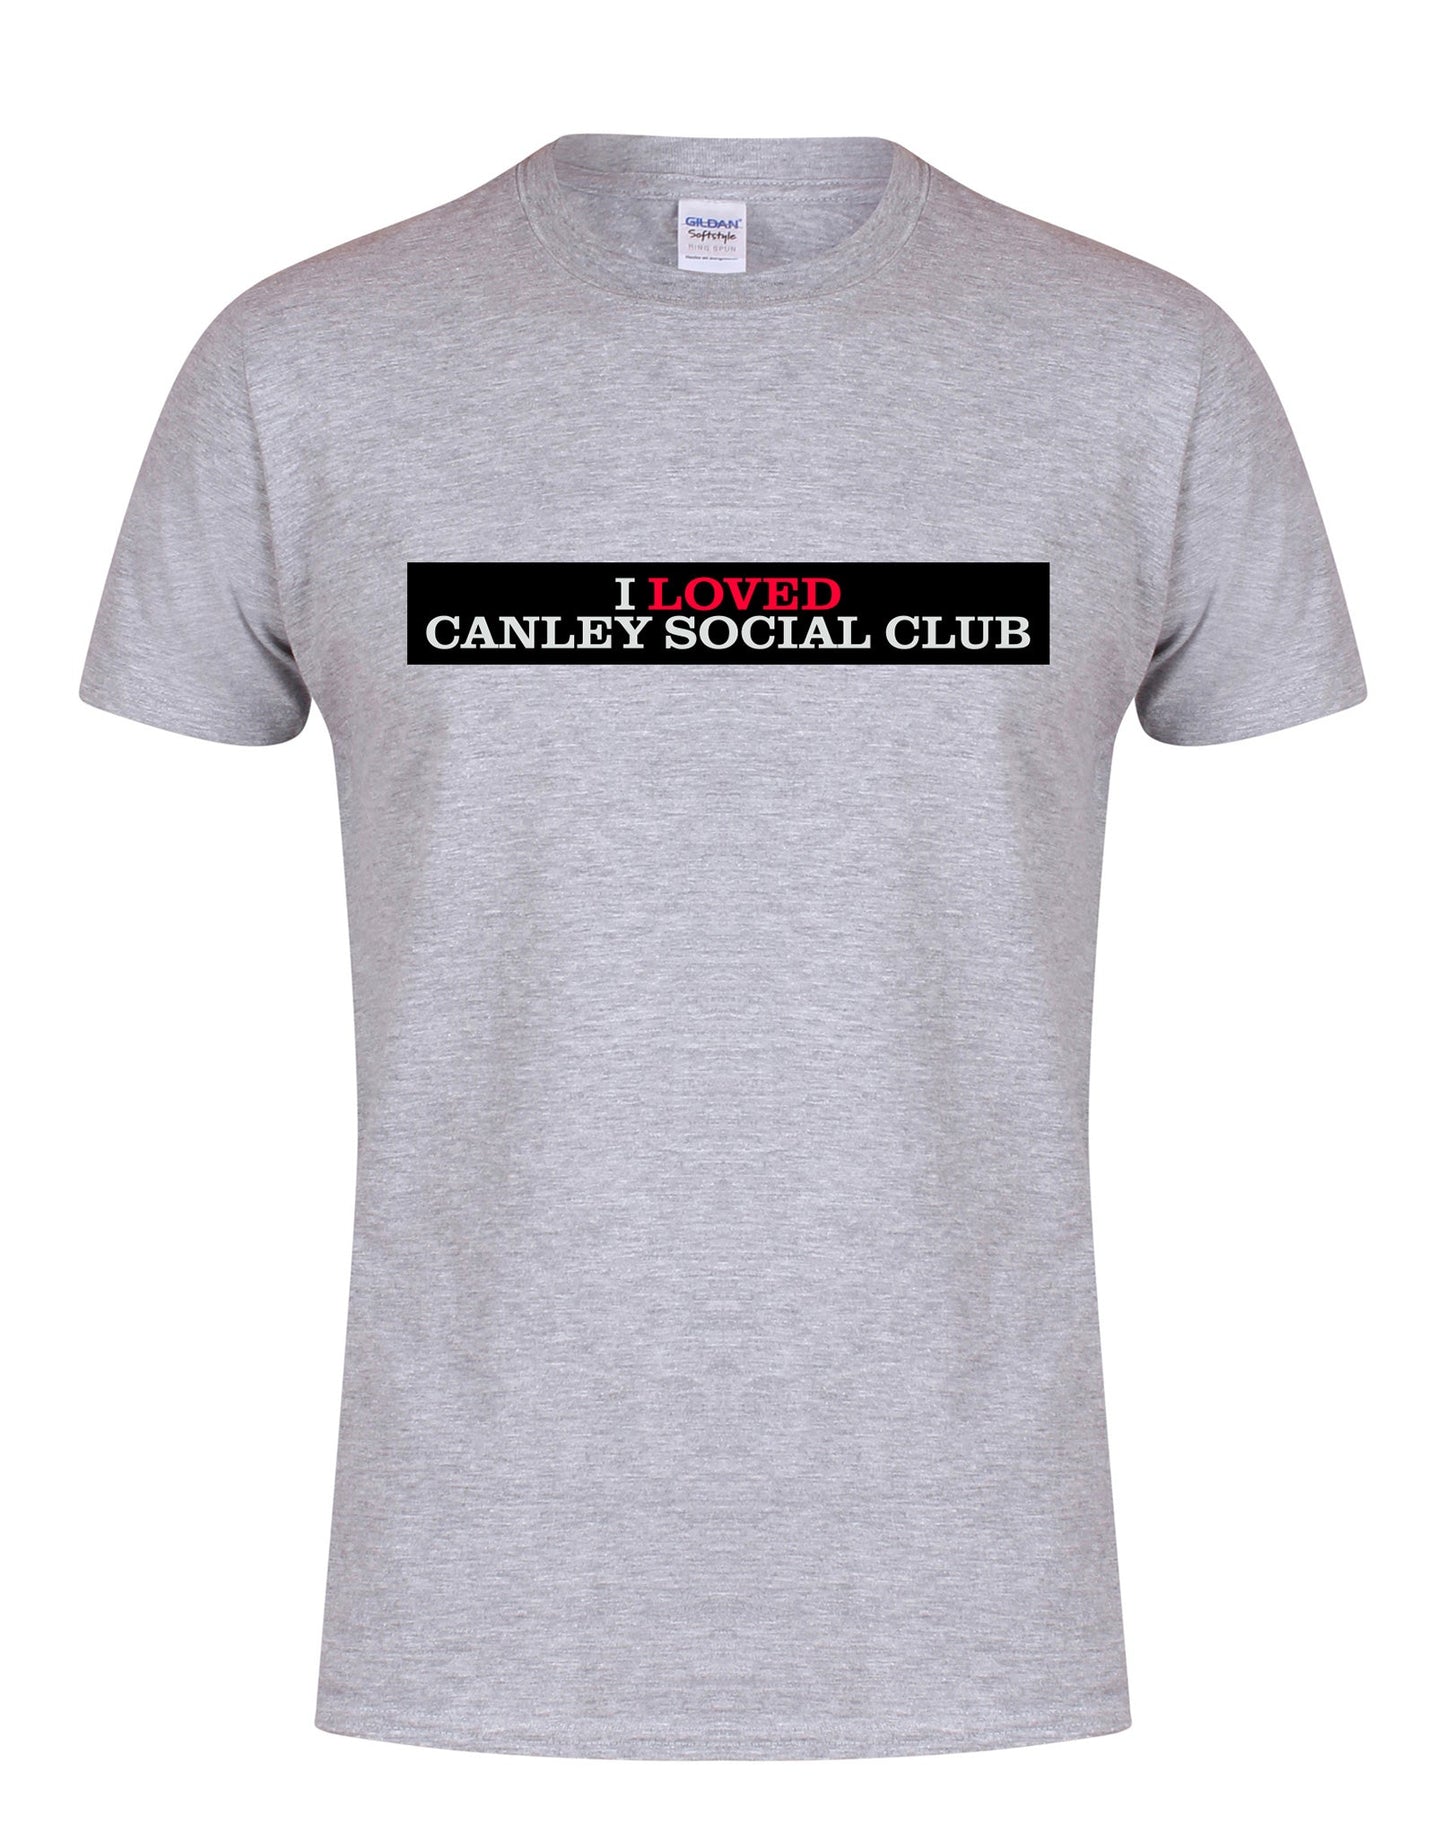 I Love Canley Social Club unisex fit T-shirt - various colours - Dirty Stop Outs